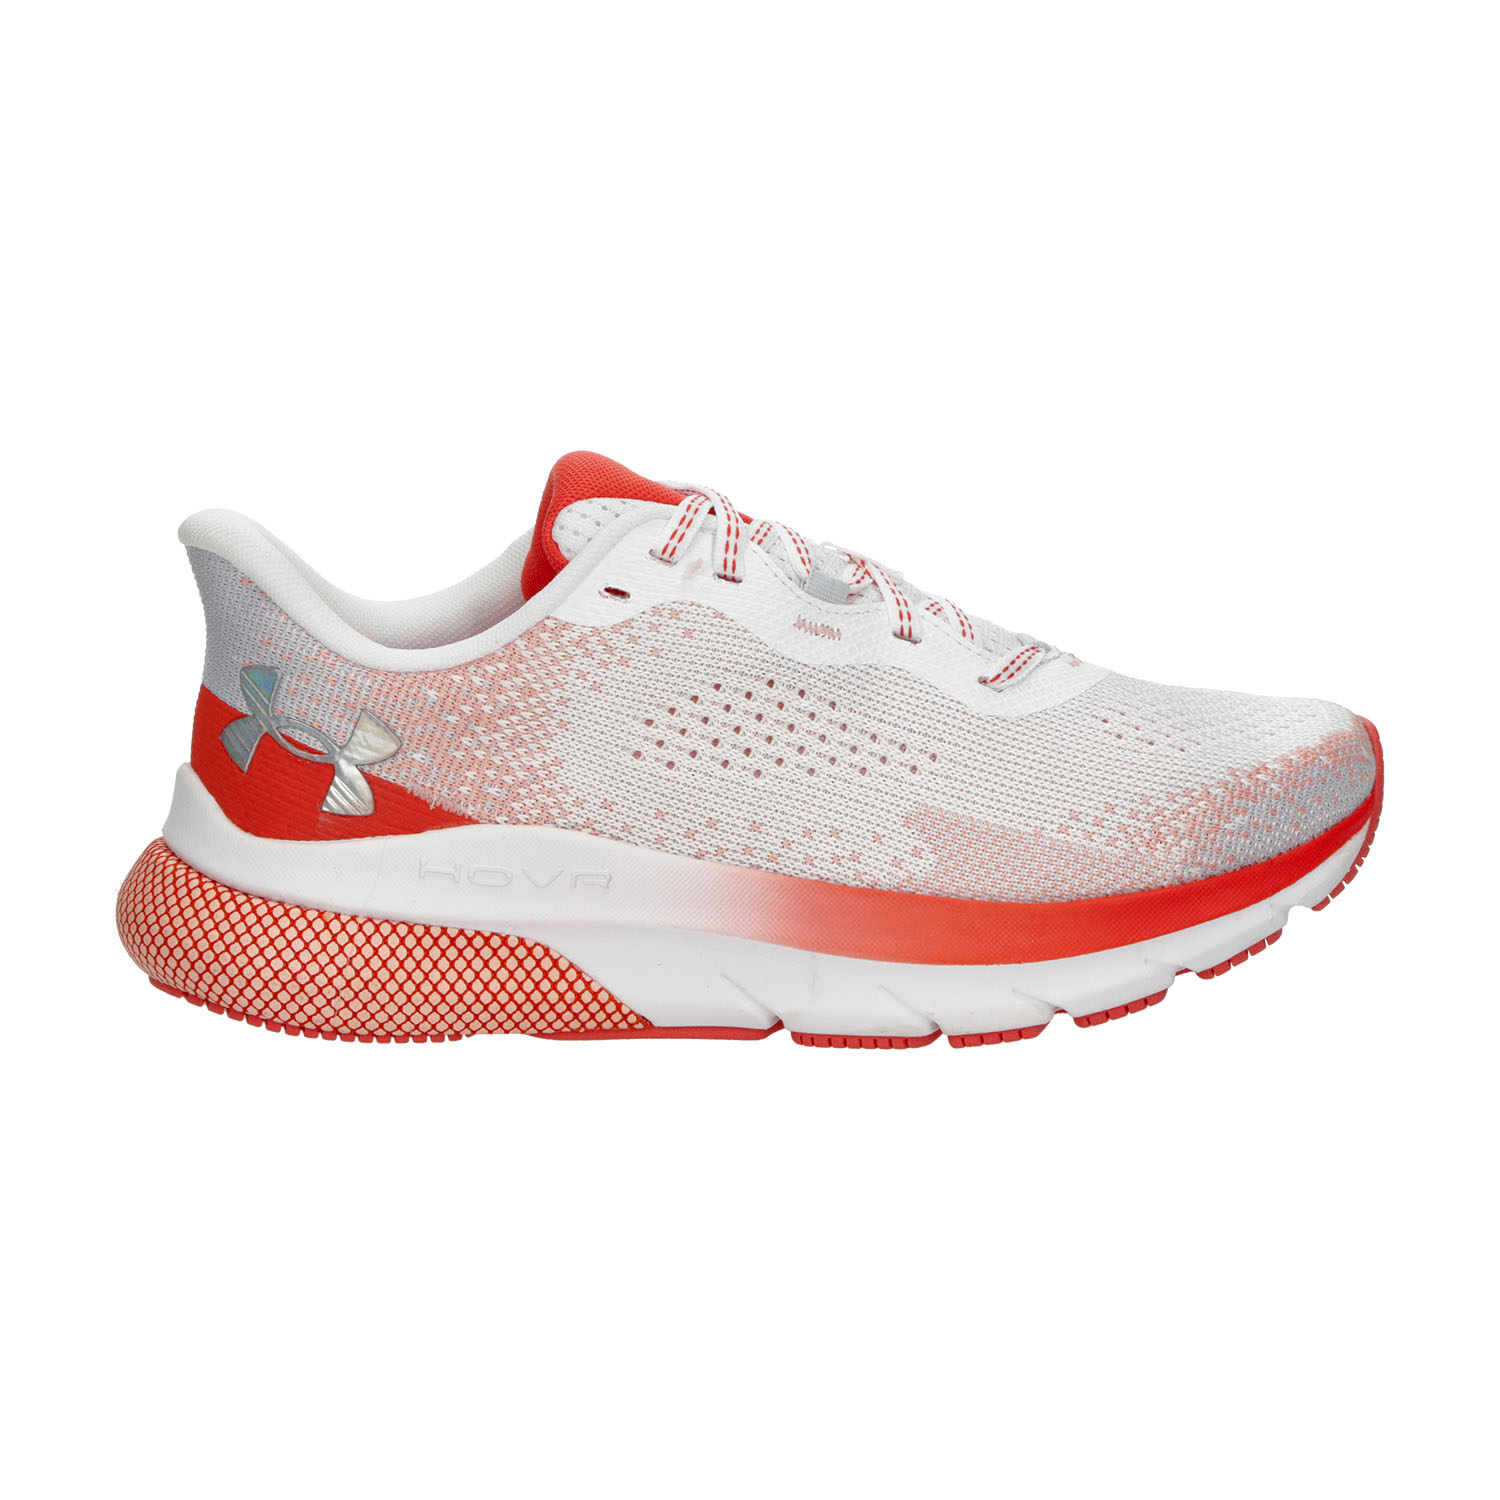 Under Armour HOVR Turbulence 2 - White/Pomegranate/Rush Red